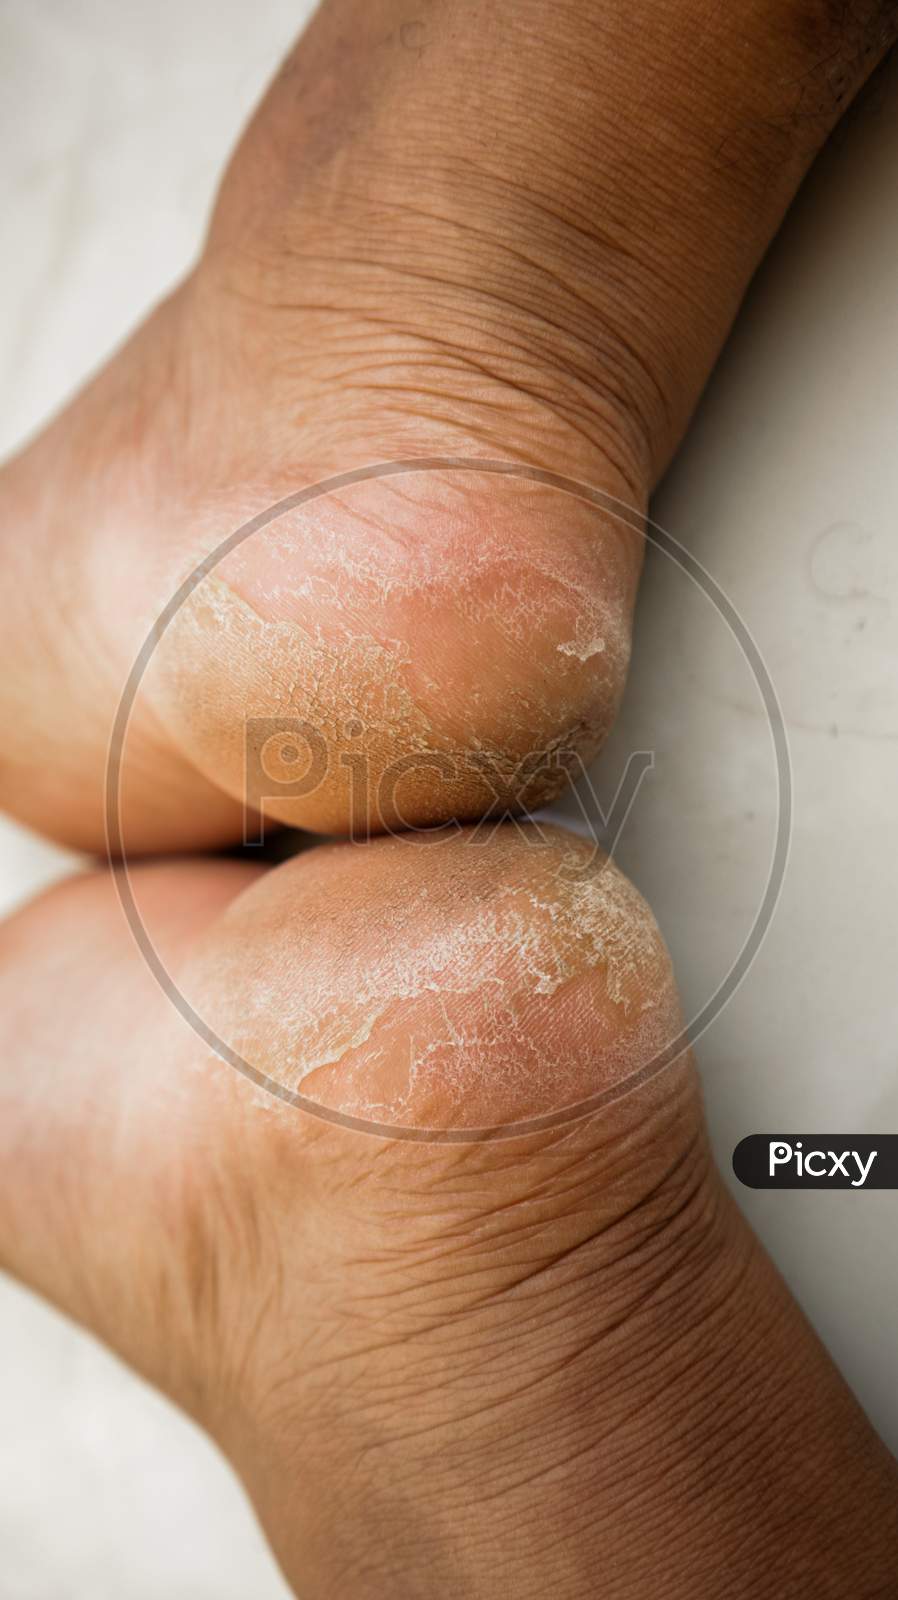 Dry Skin On Feet | And 3 Tips To Fix